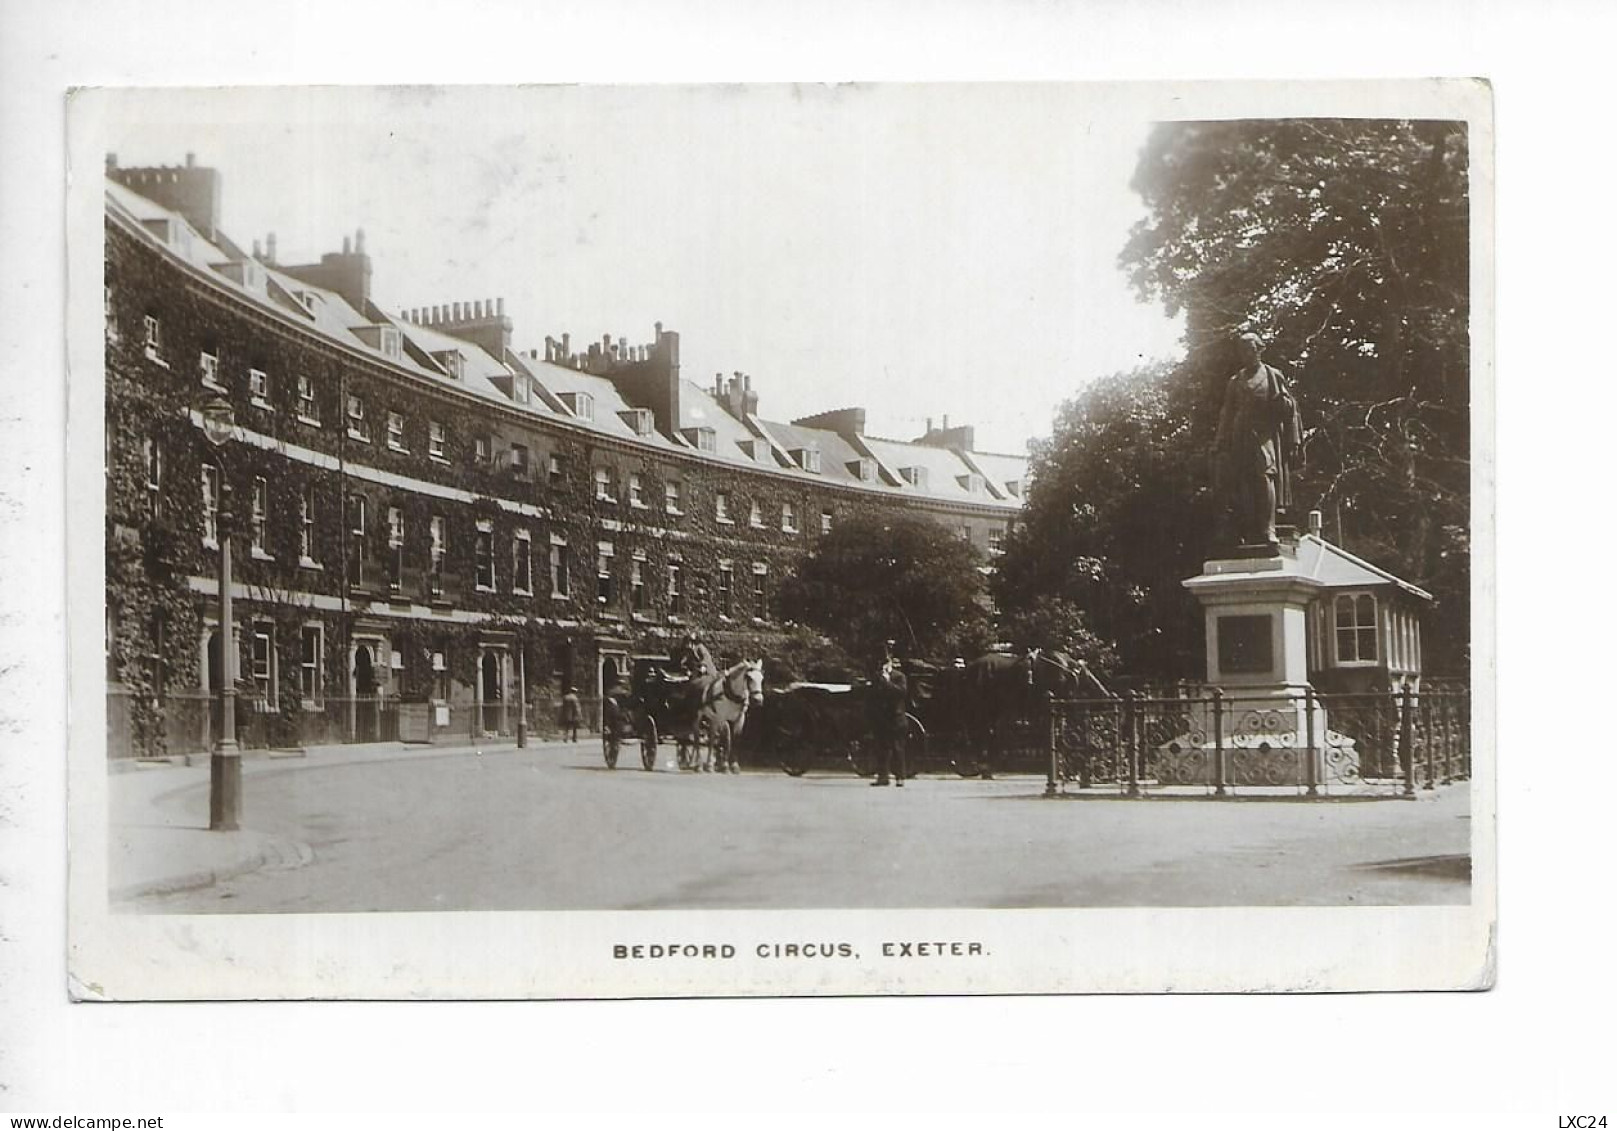 EXETER. BEDFORD CIRCUS. - Exeter